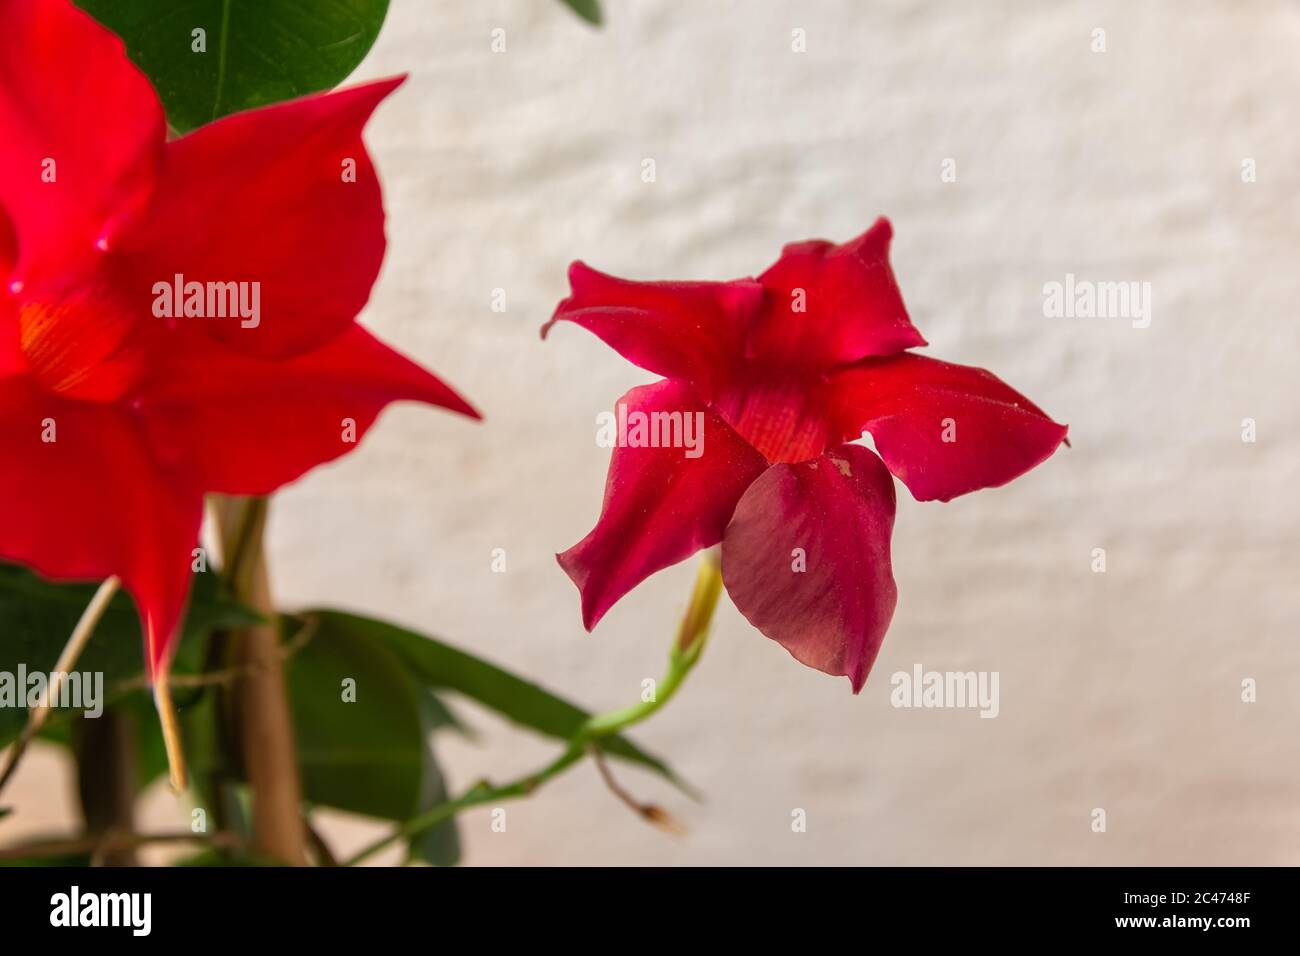 Closeup shot of a beautiful red Mandevilla flower on a blurred background Stock Photo